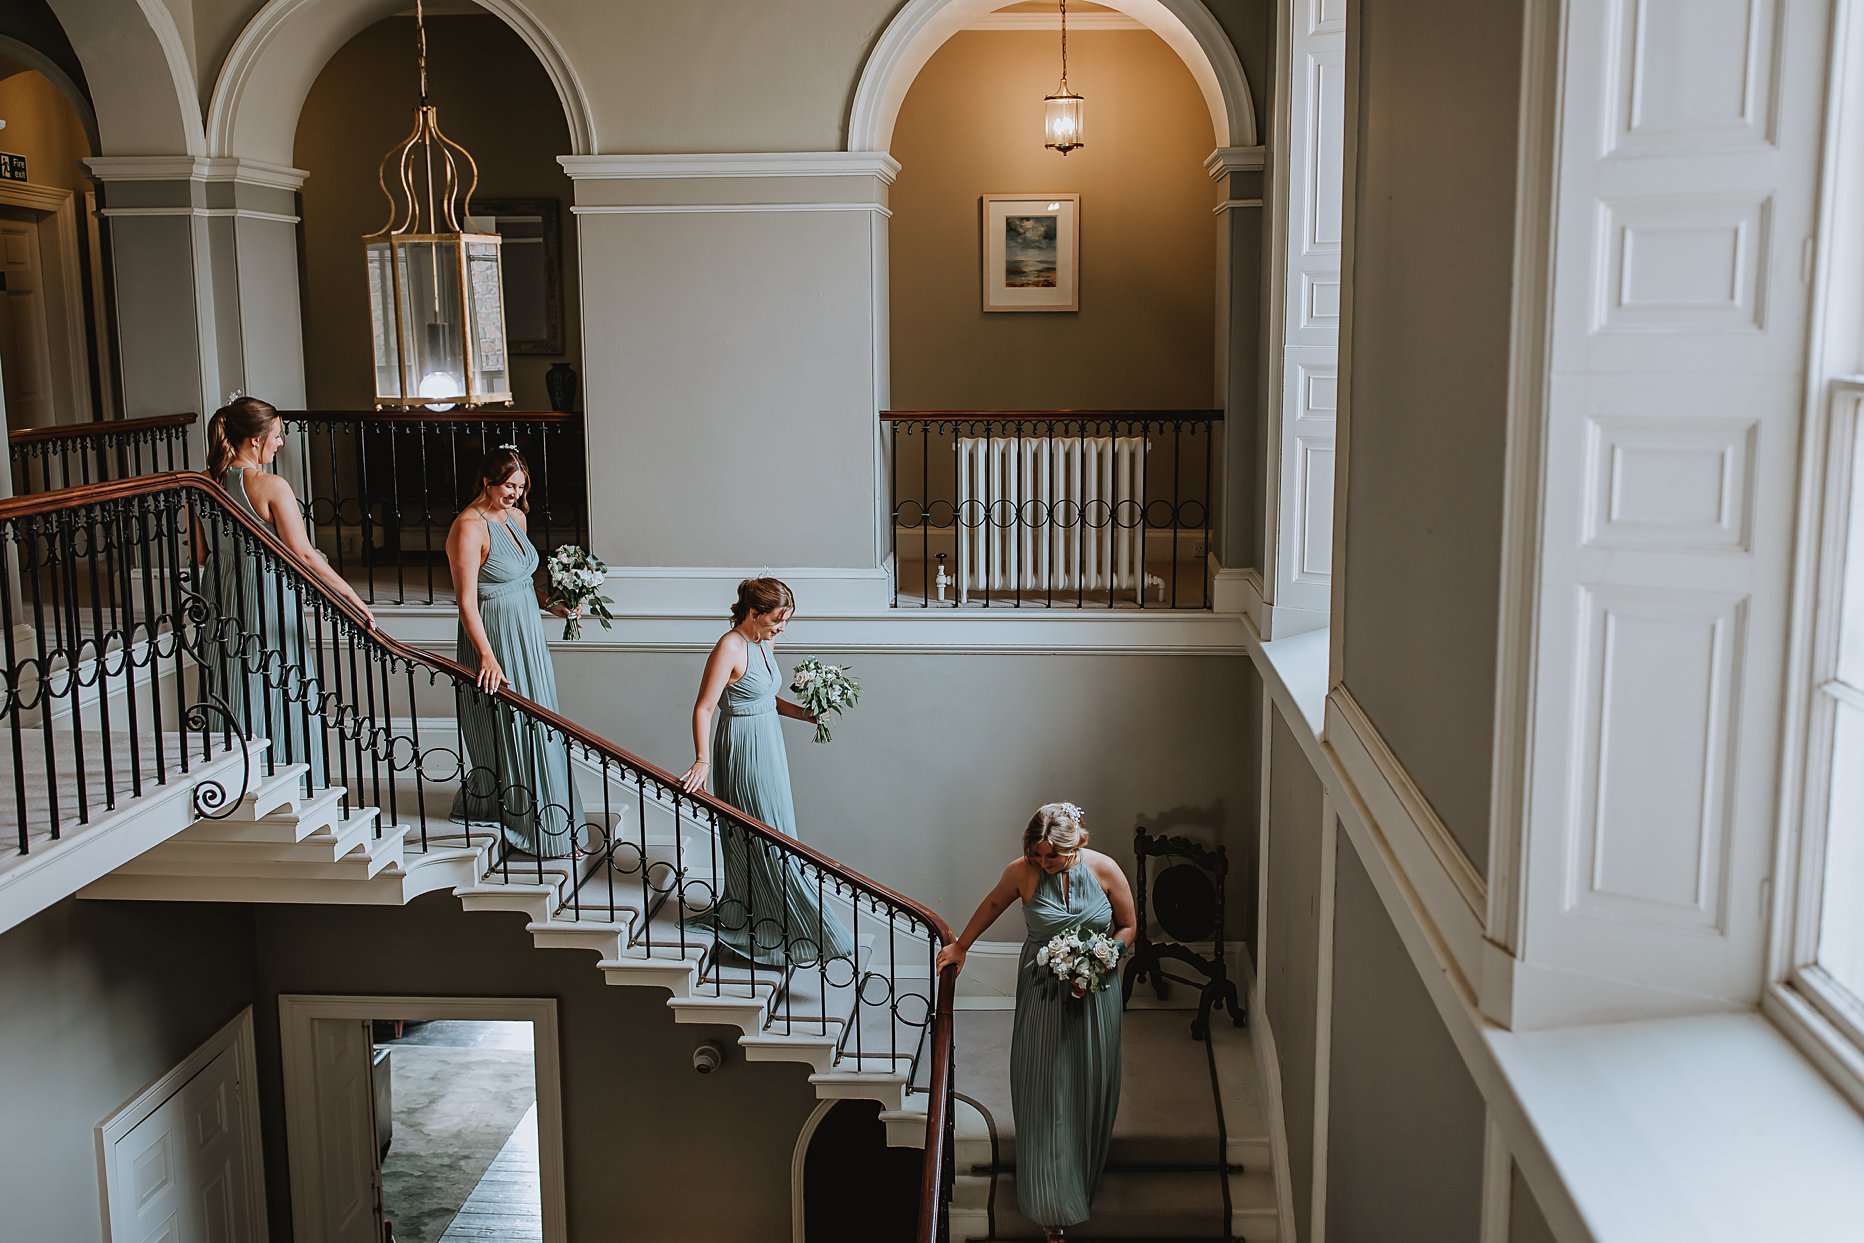 Four bridesmaids dressed in sage green dresses walking down the grand staircase at Saltmarshe Hall Wedding Venue.